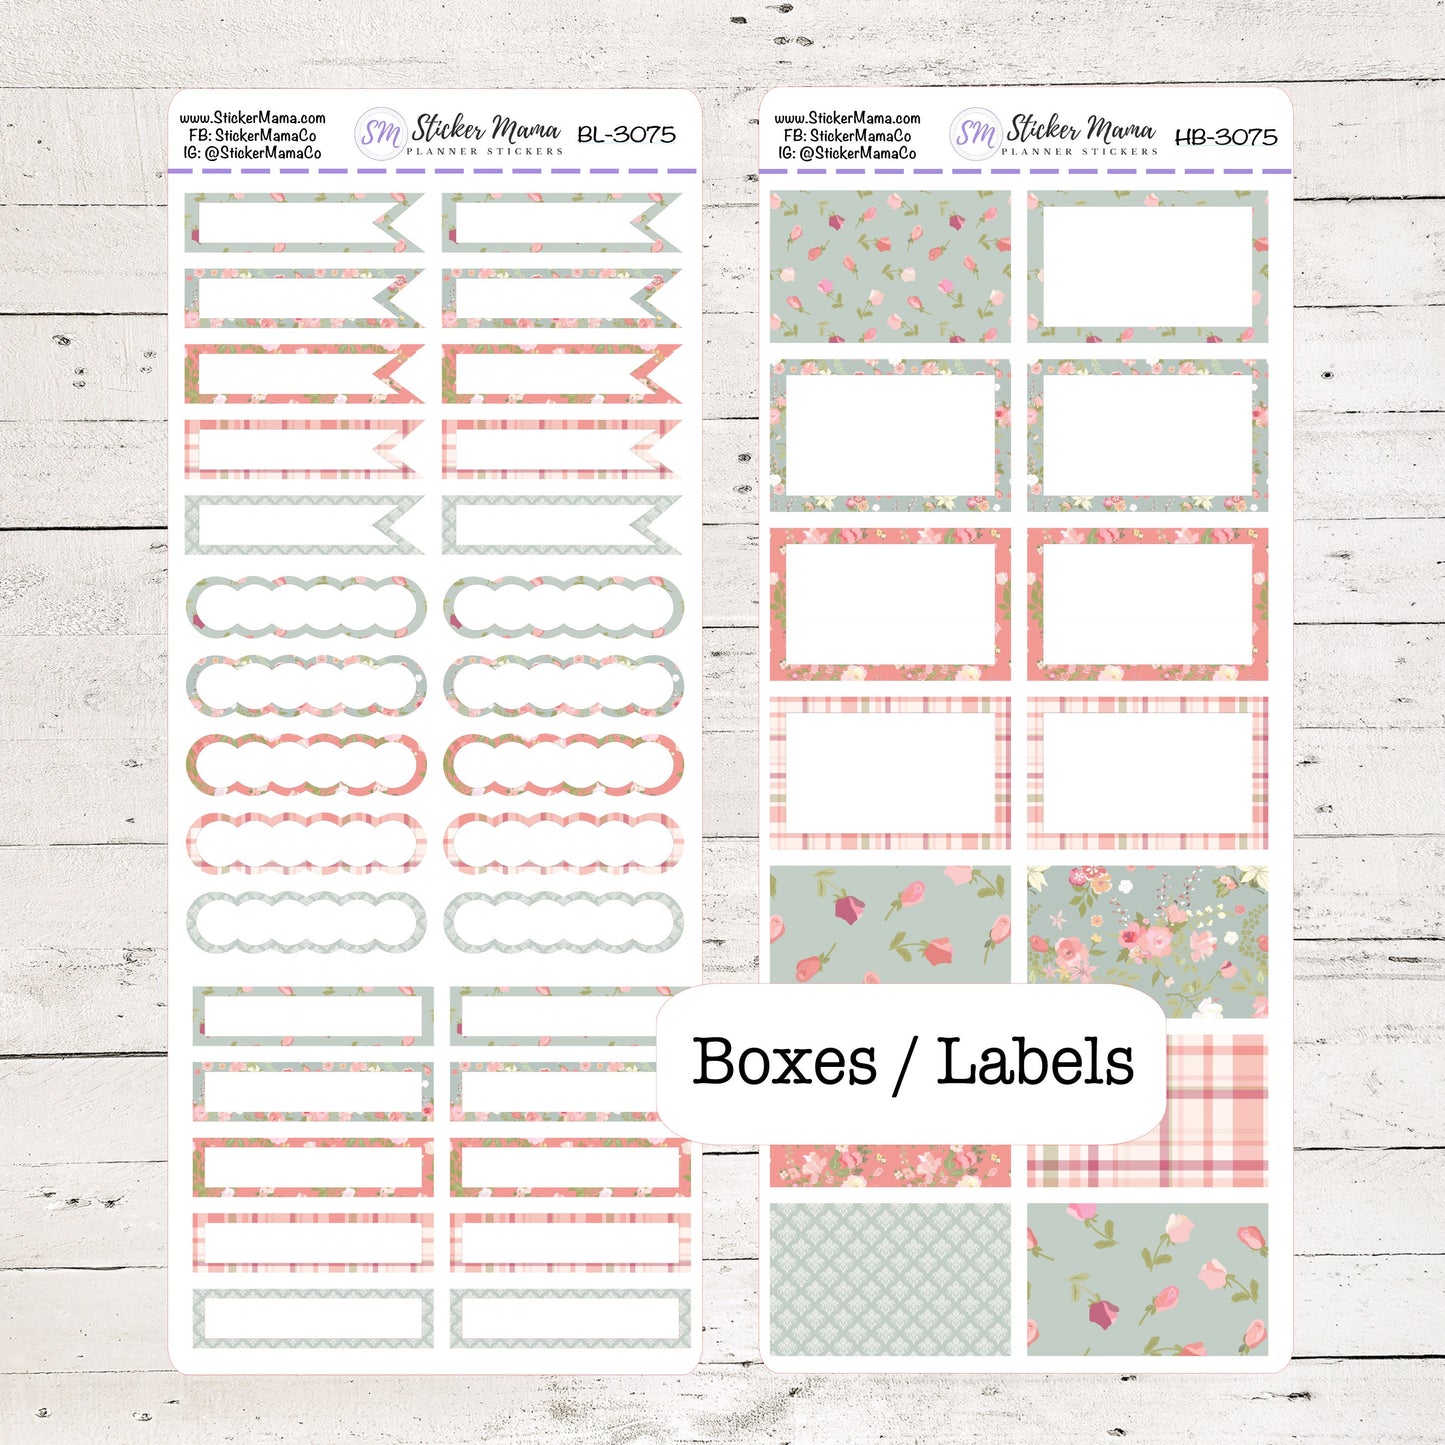 BL-3075 - HB-3075 BASIC Label Stickers - May Shabby Chic - Half Boxes - Planner Stickers - Full Box for Planners